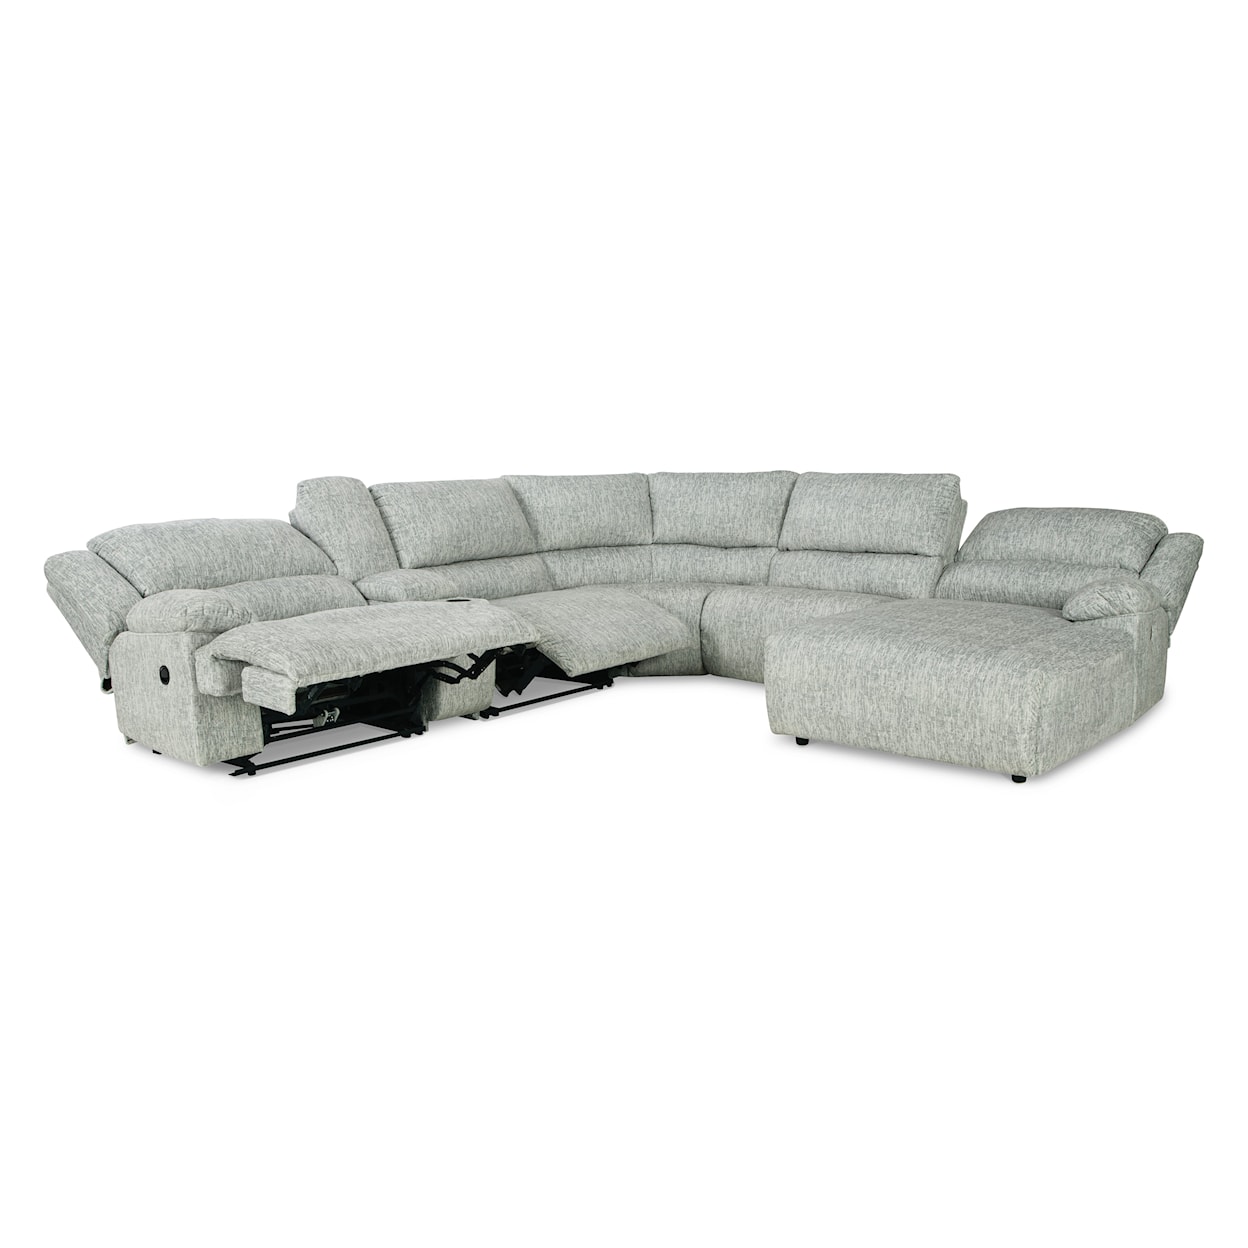 Signature Design by Ashley McClelland 6-Piece Reclining Sectional with Chaise